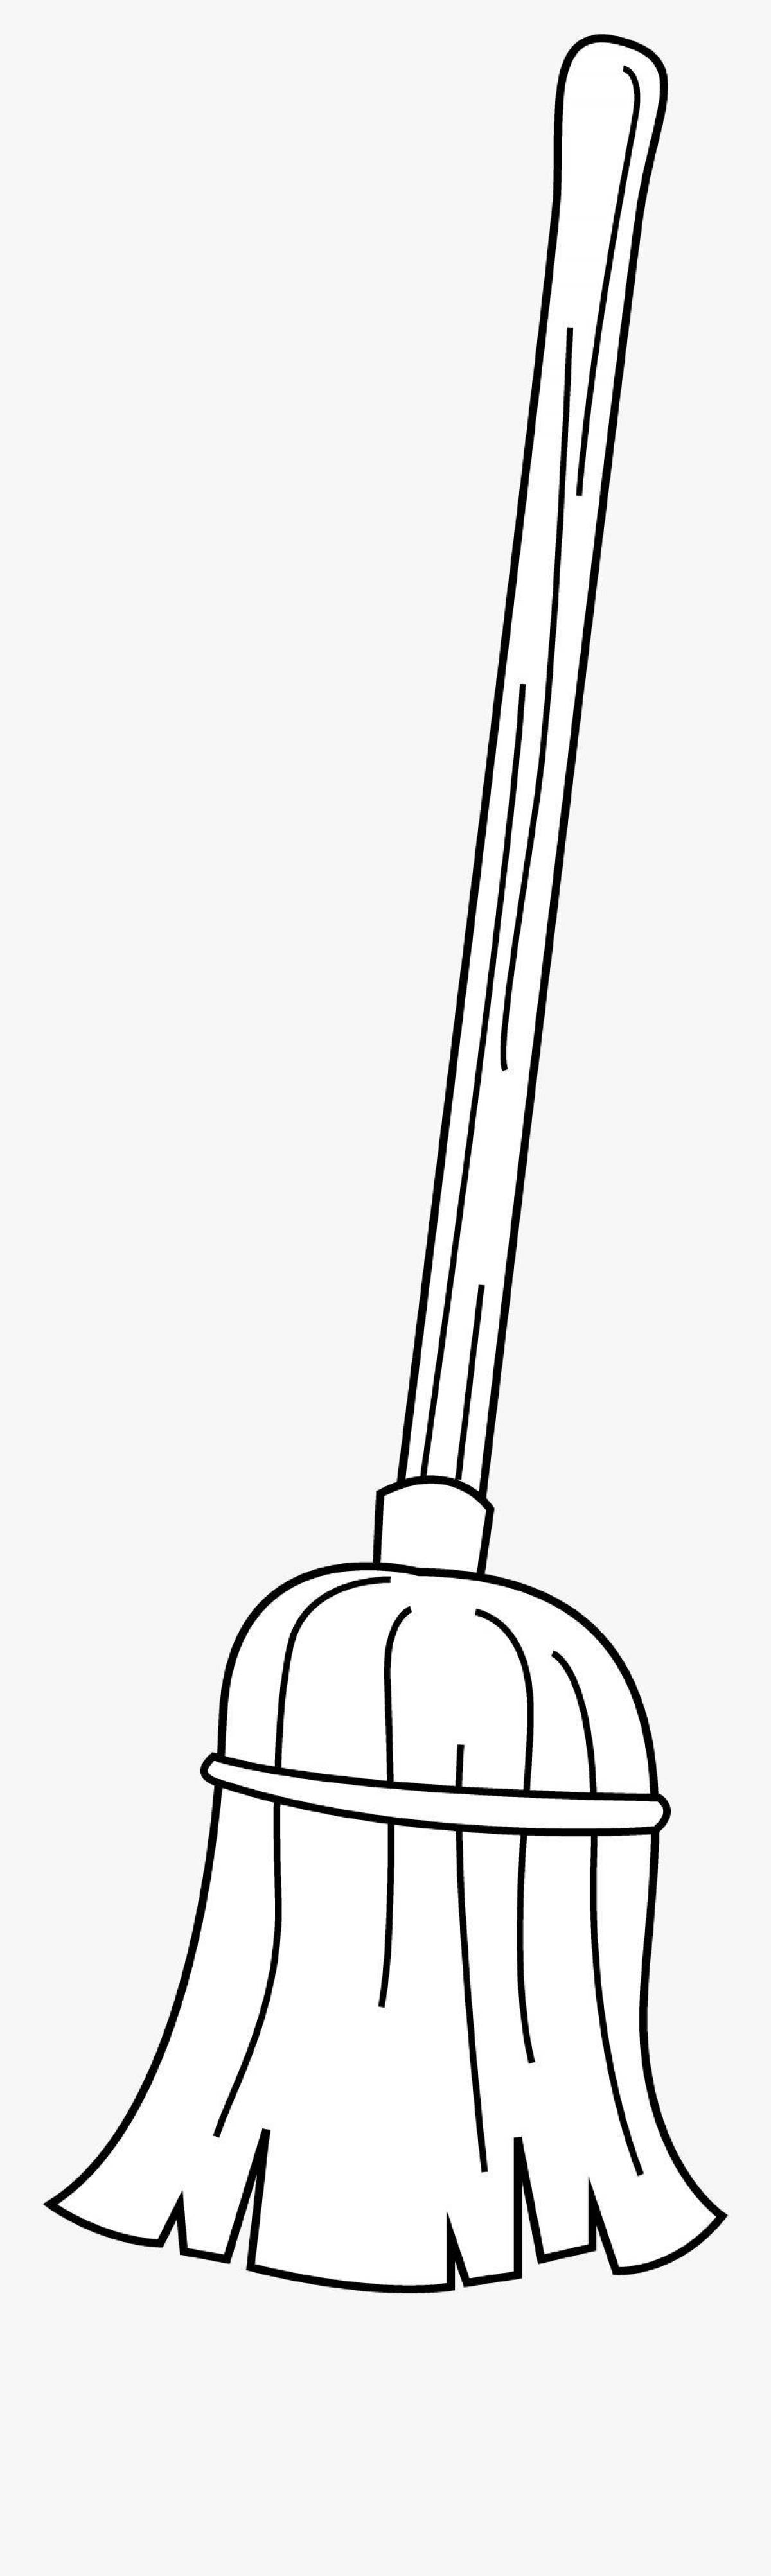 Creative mop coloring page